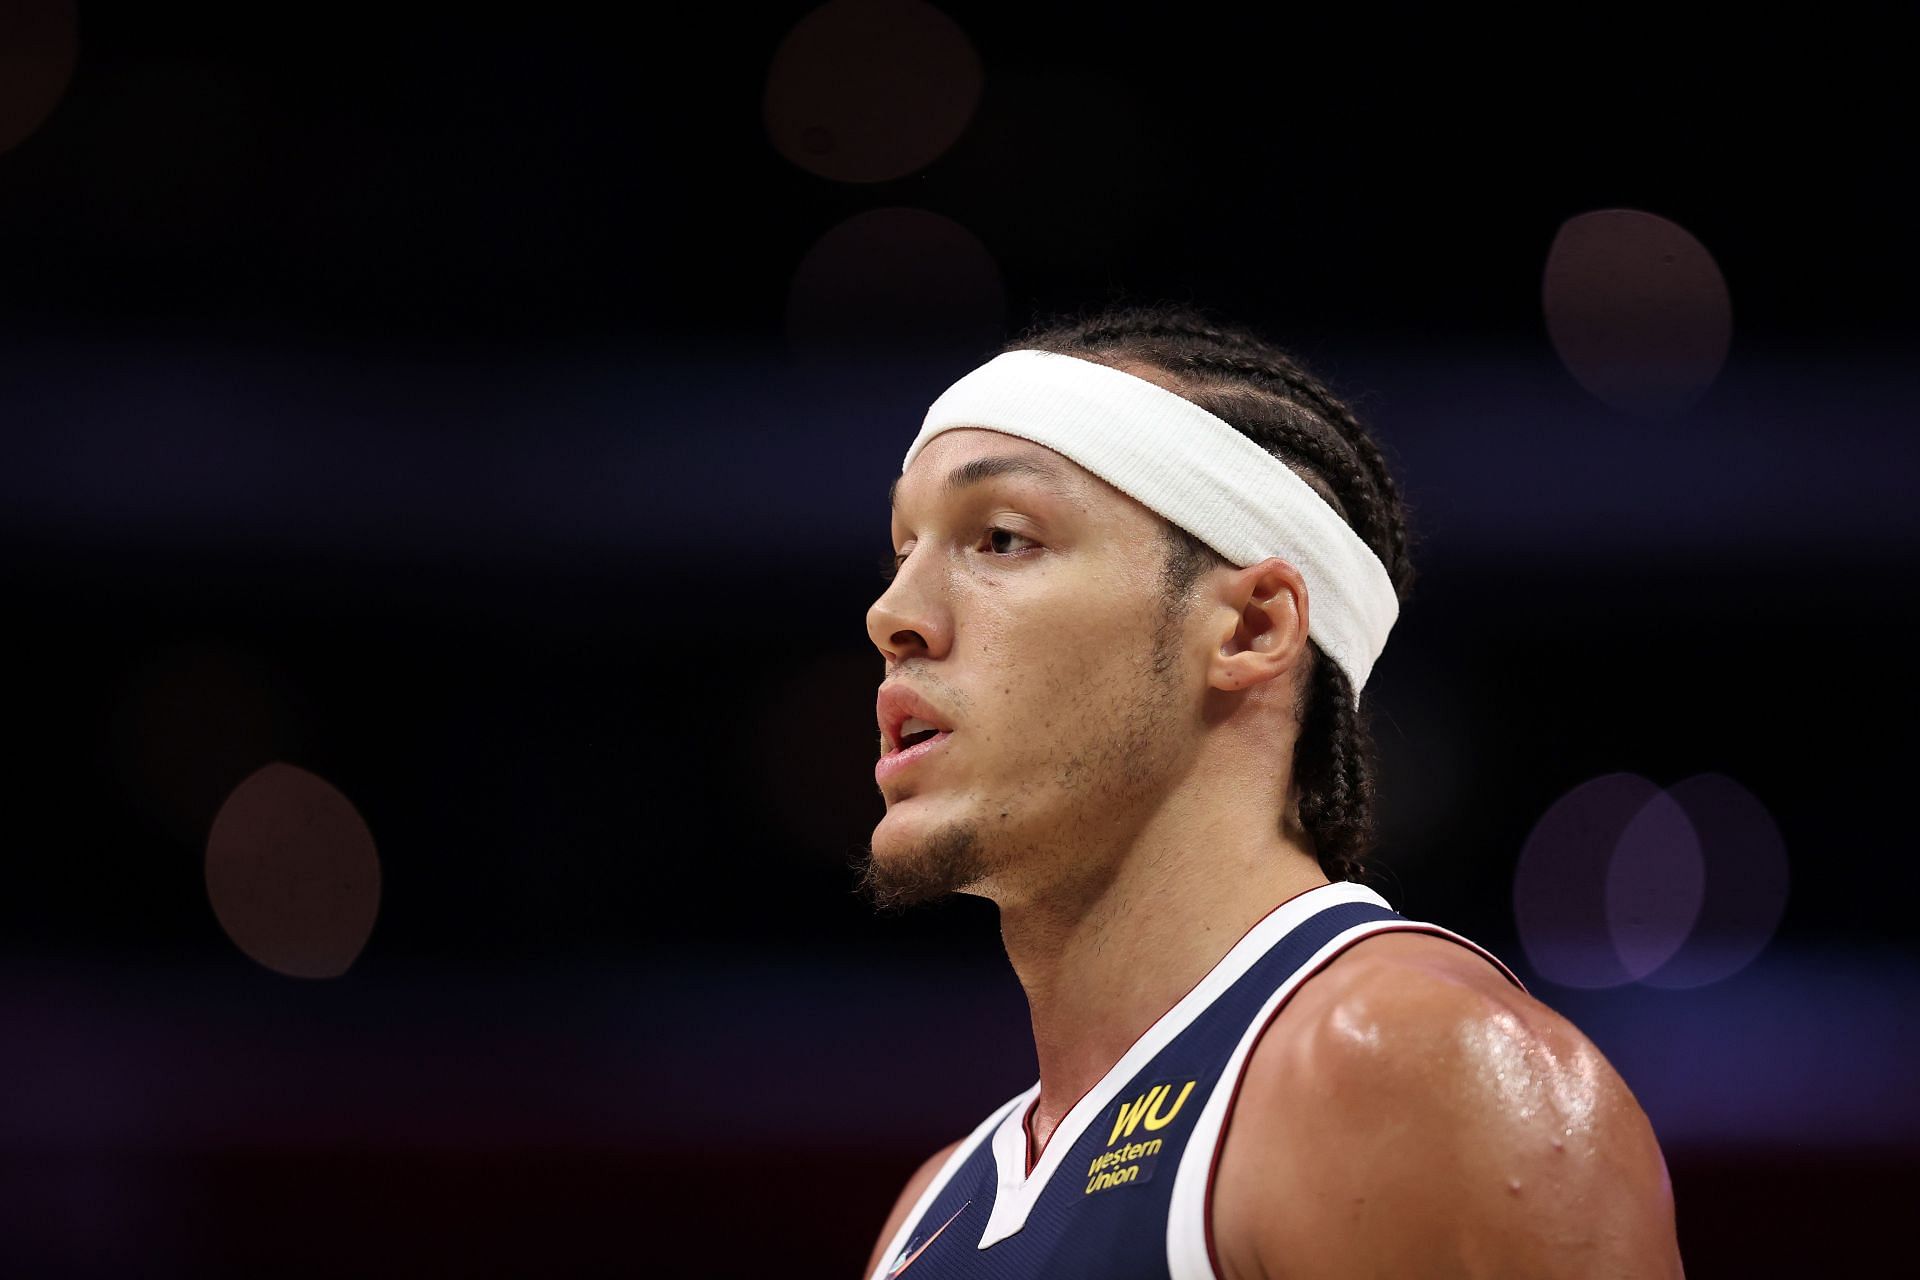 Aaron Gordon #50 of the Denver Nuggets in the first quarter of preseason action against the LA Clippers at Staples Center on October 04, 2021 in Los Angeles, California.